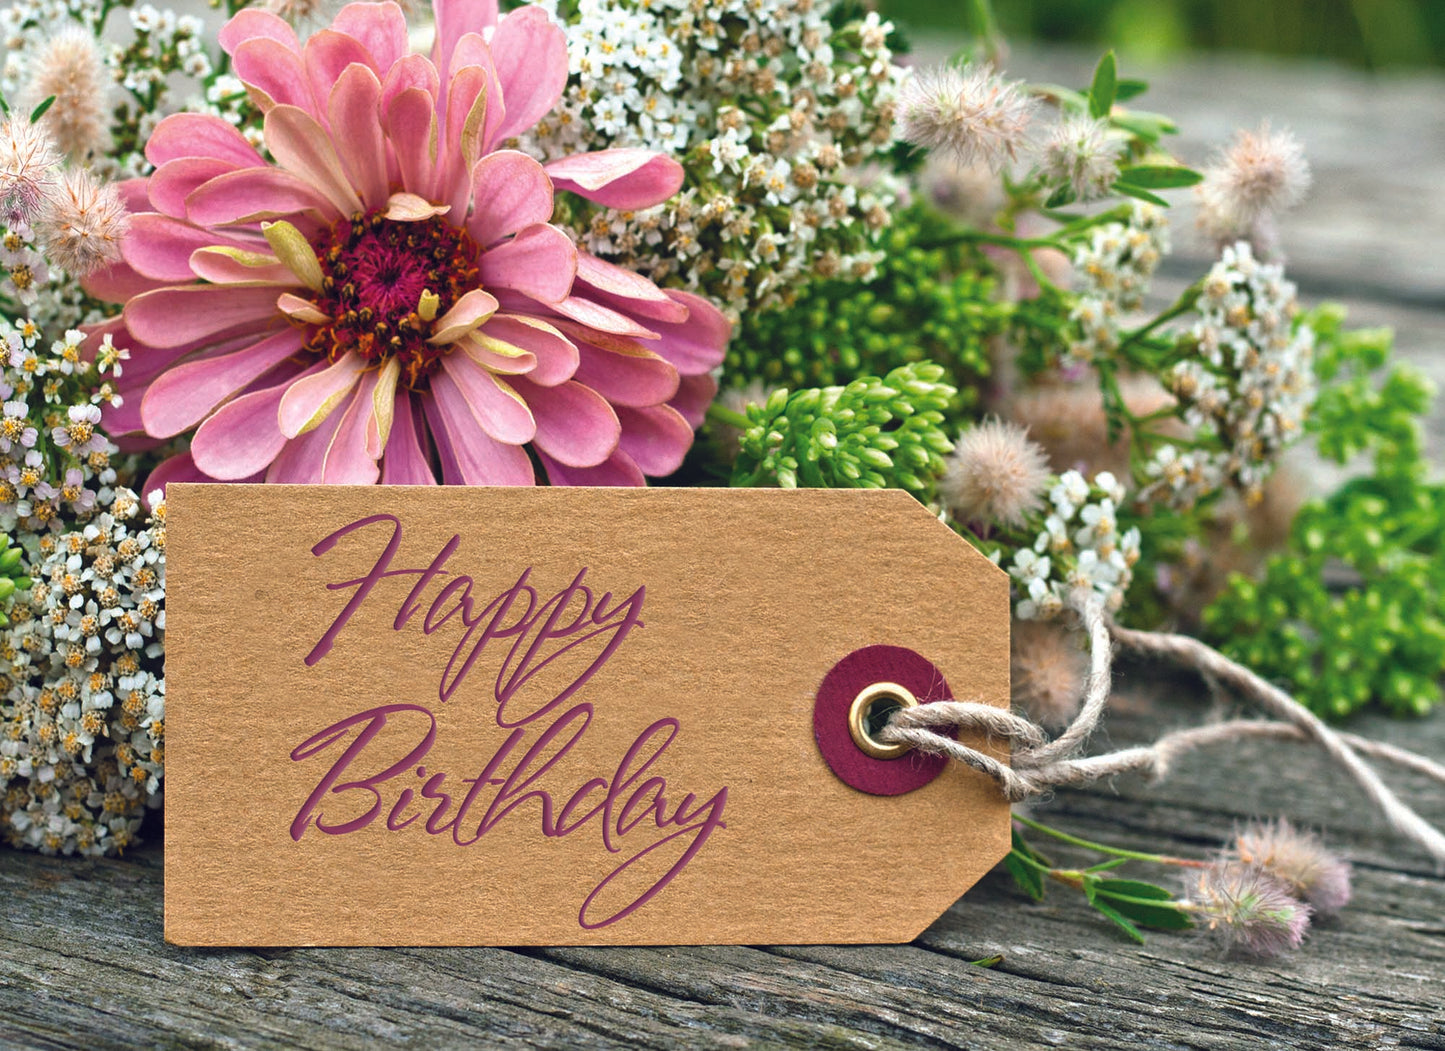 Floral Tags - Boxed Assortment Birthday Cards